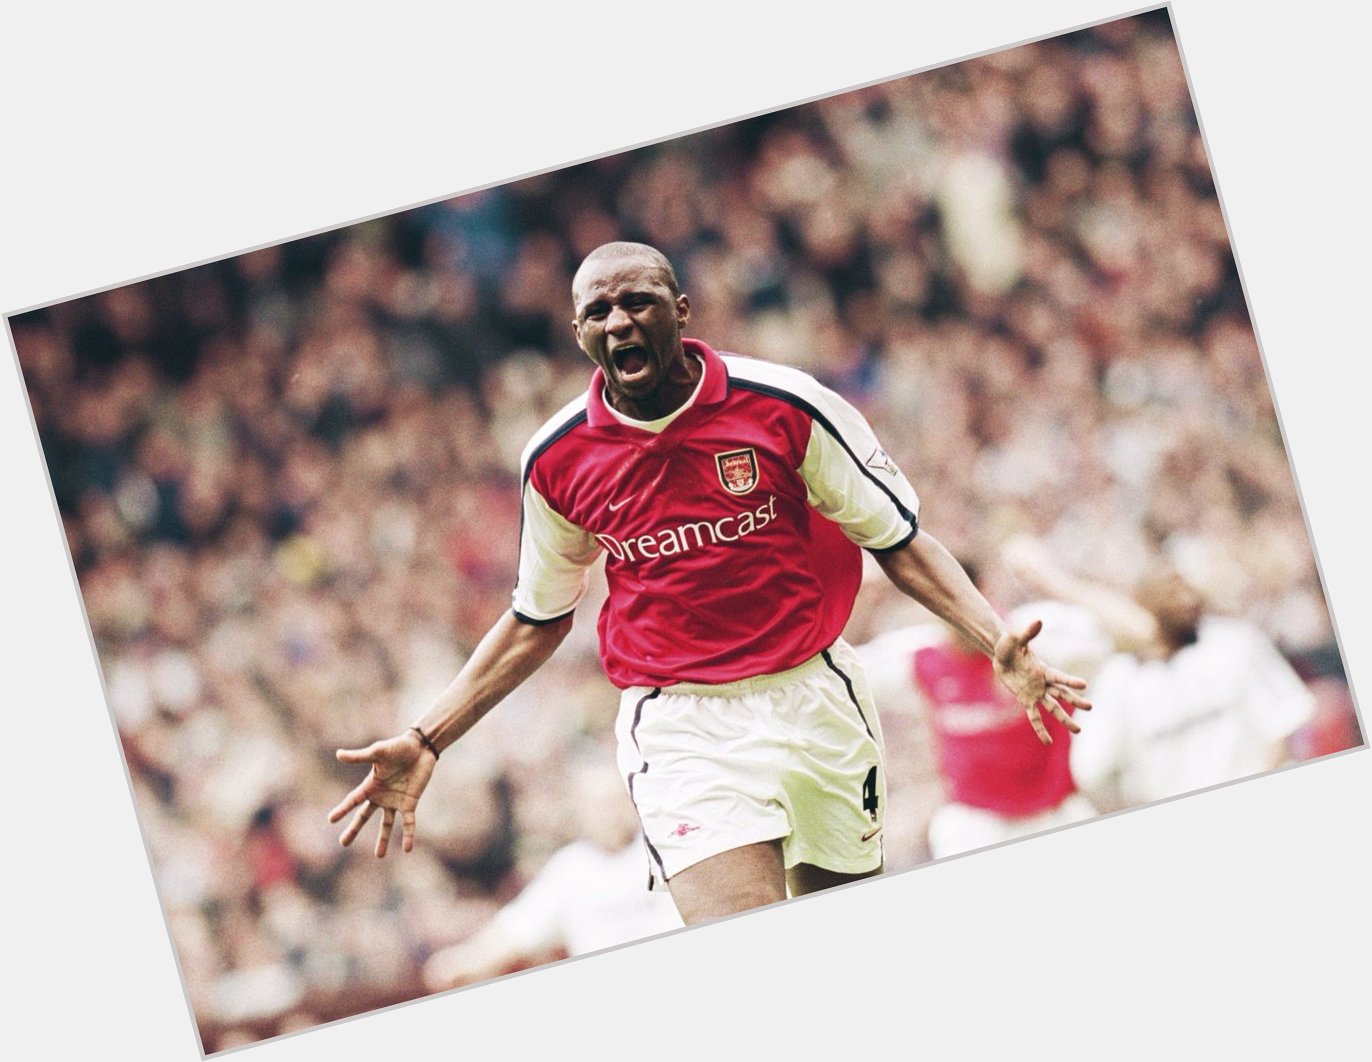 Happy birthday to one of the greatest ever players in Arsenal\s history - Patrick Vieira turns 42 today! 